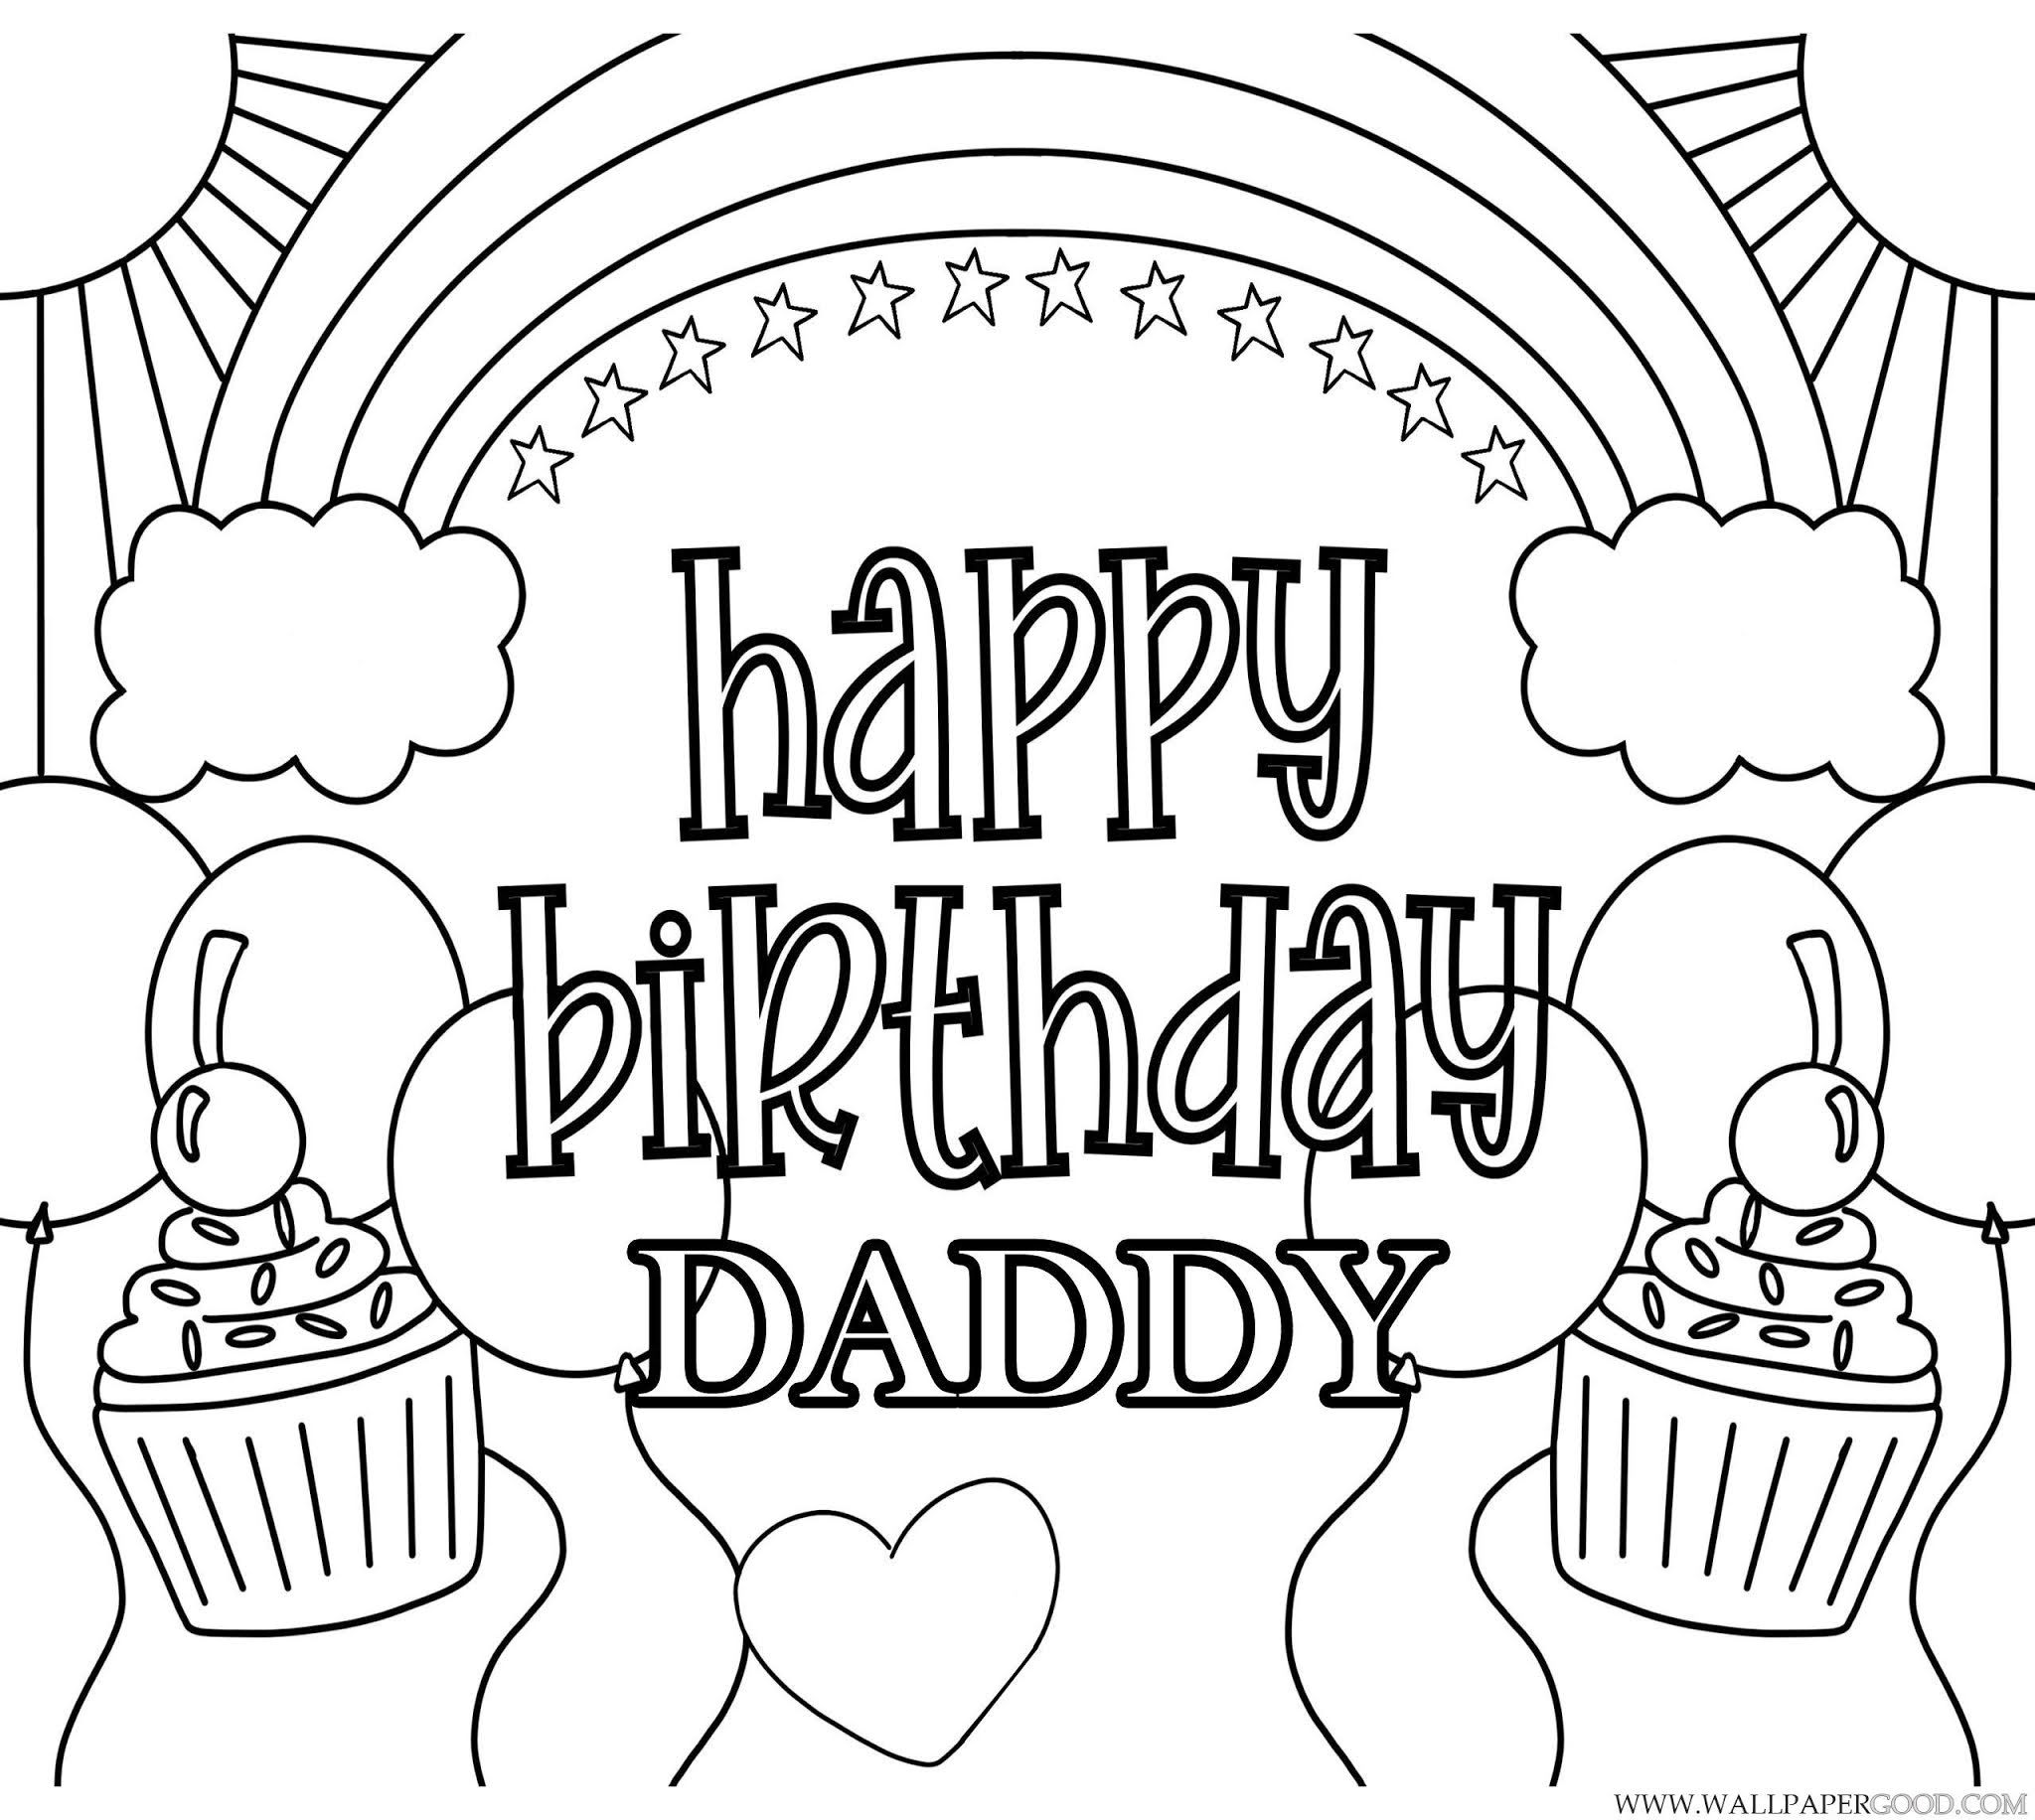 Happy Birthday Daddy Coloring Pages Free Printable